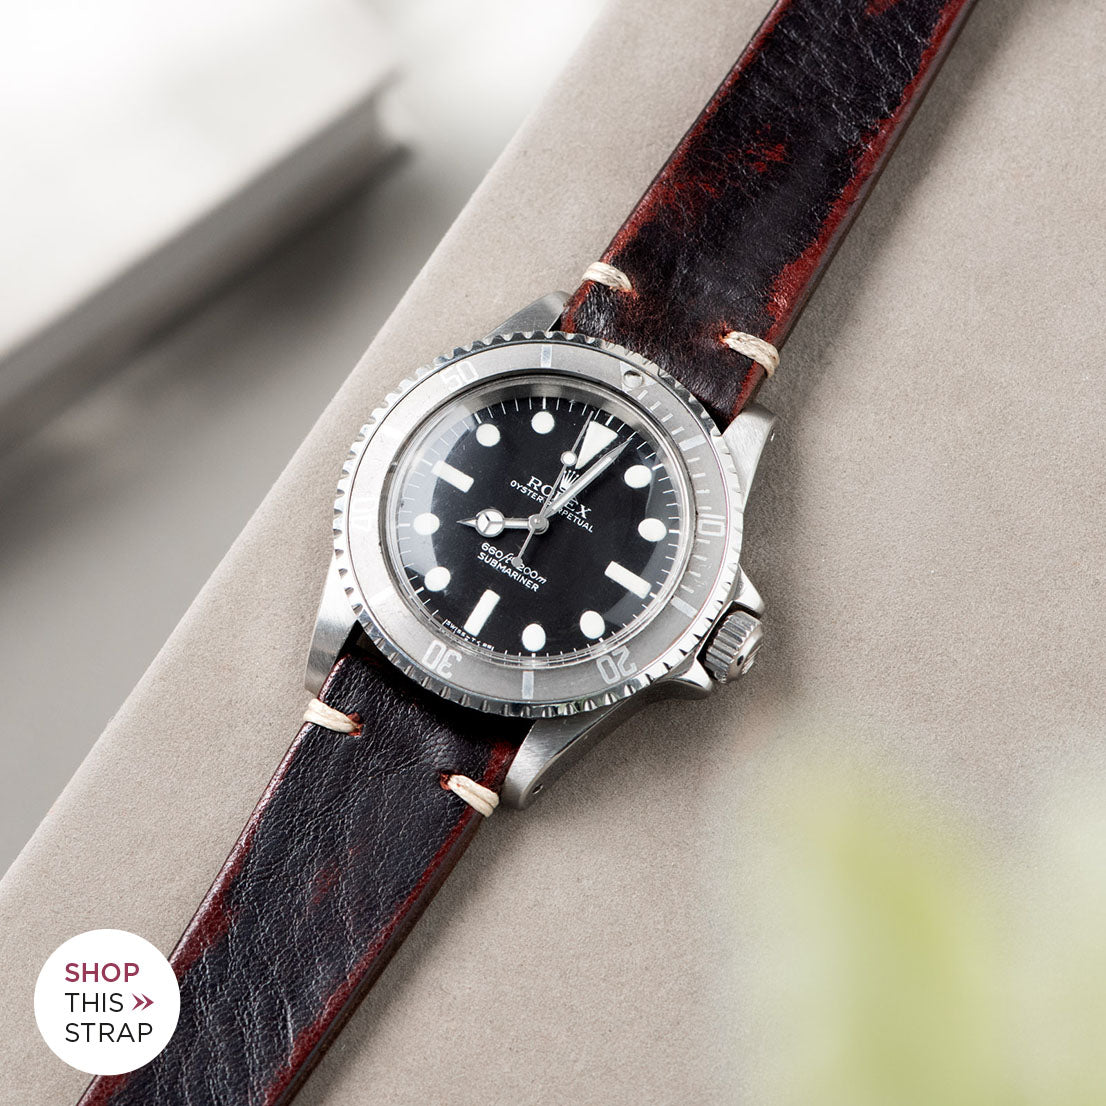 Bulang and Sons_Strap Guide_The Rolex 5513 Faded Maxi Submariner_Diablo Black Leather Watch Strap